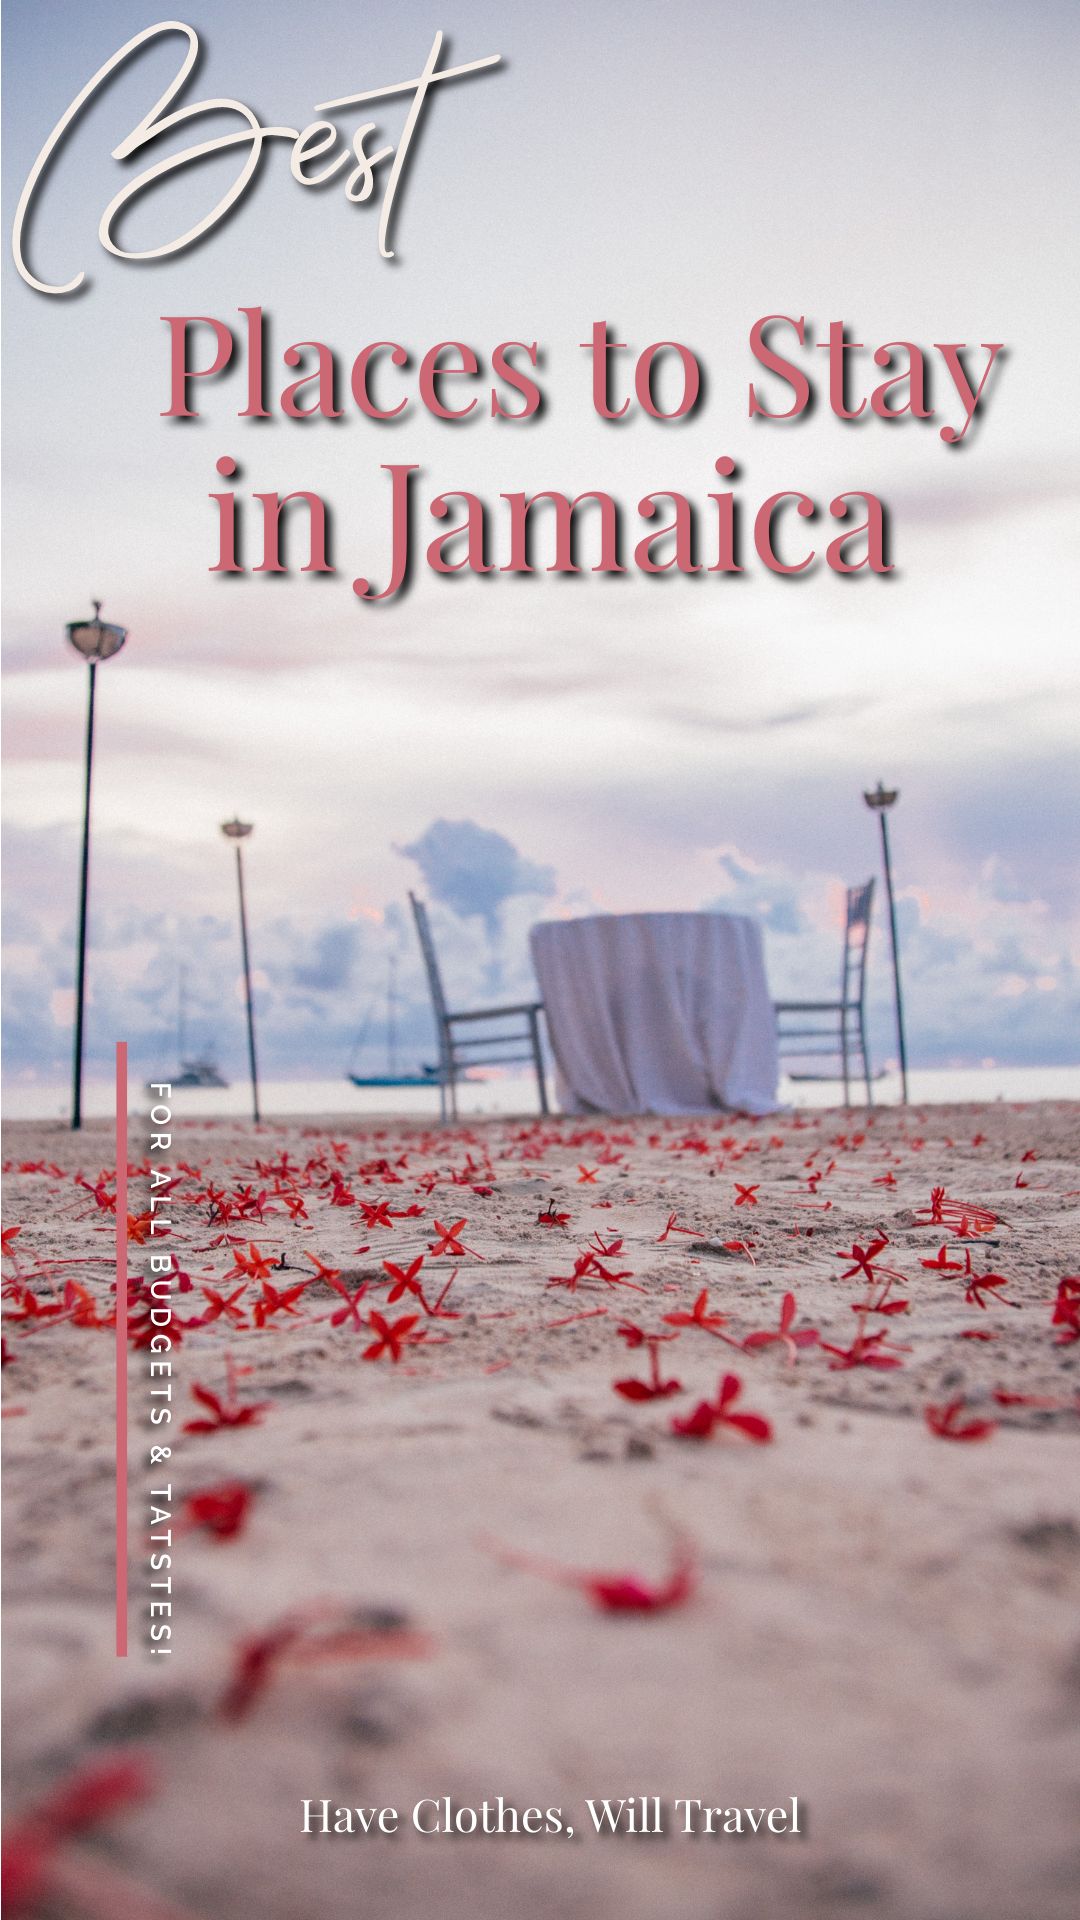 A beachfront romantic dinner for two with a sweetheart table and flower-lined beach. Text across the image says "best places to stay in Jamaica"